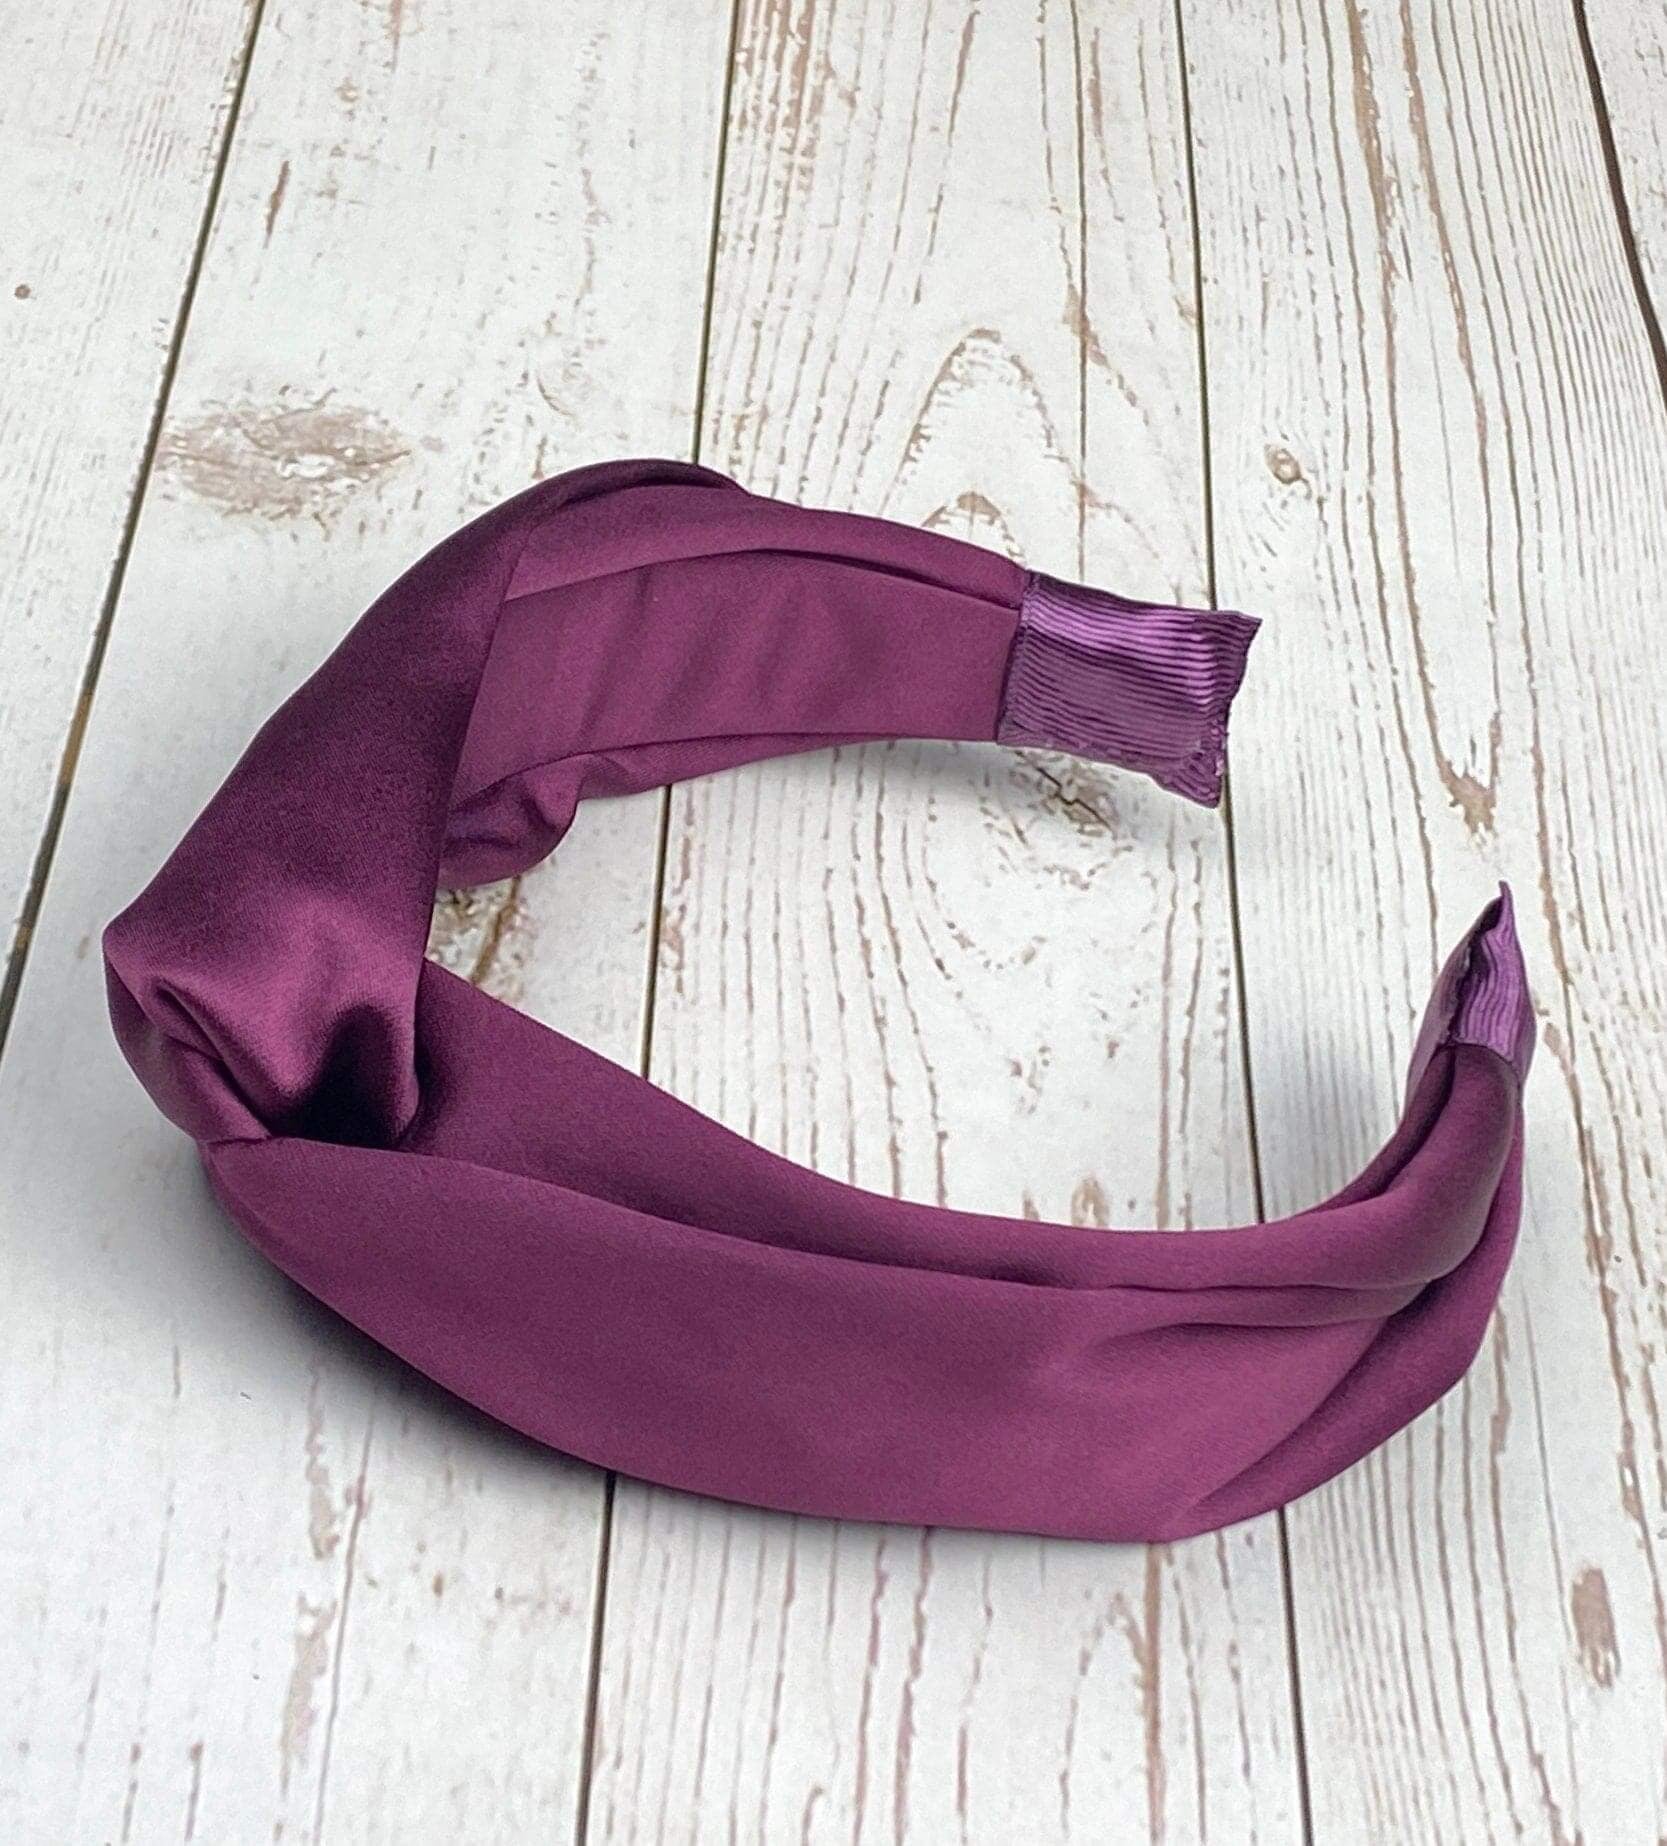 Make a bold statement with our maroon color headband and add some personality to your everyday style. It is the perfect birthday gift for someone special!